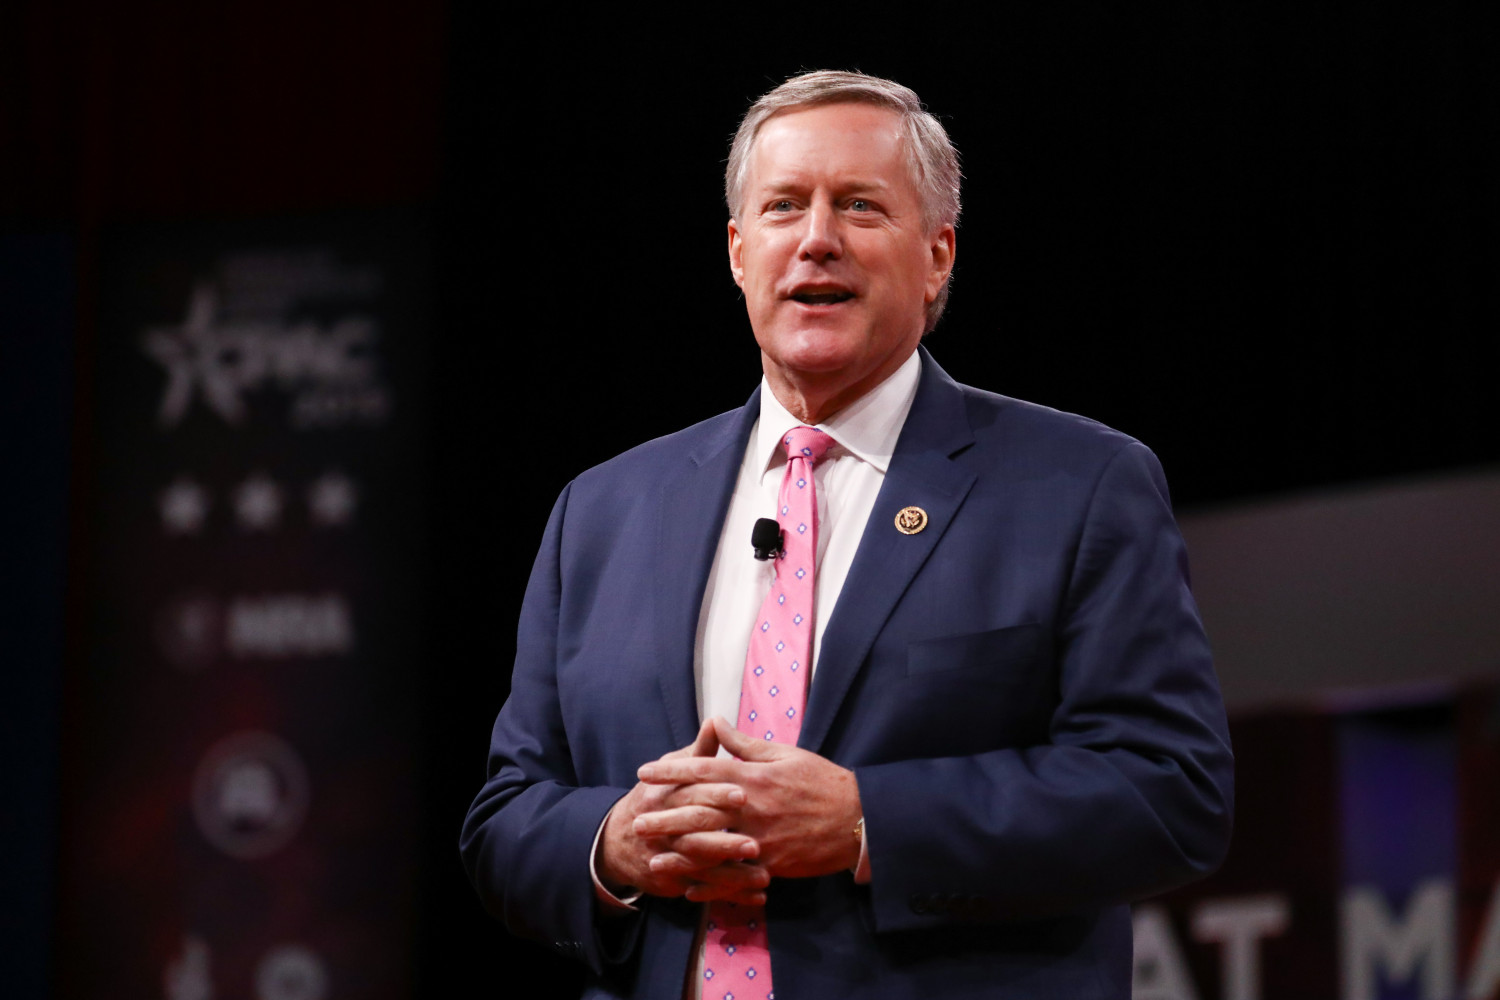 No National Mandate to Wear Masks, Governors, Mayors Can Decide: Mark Meadows